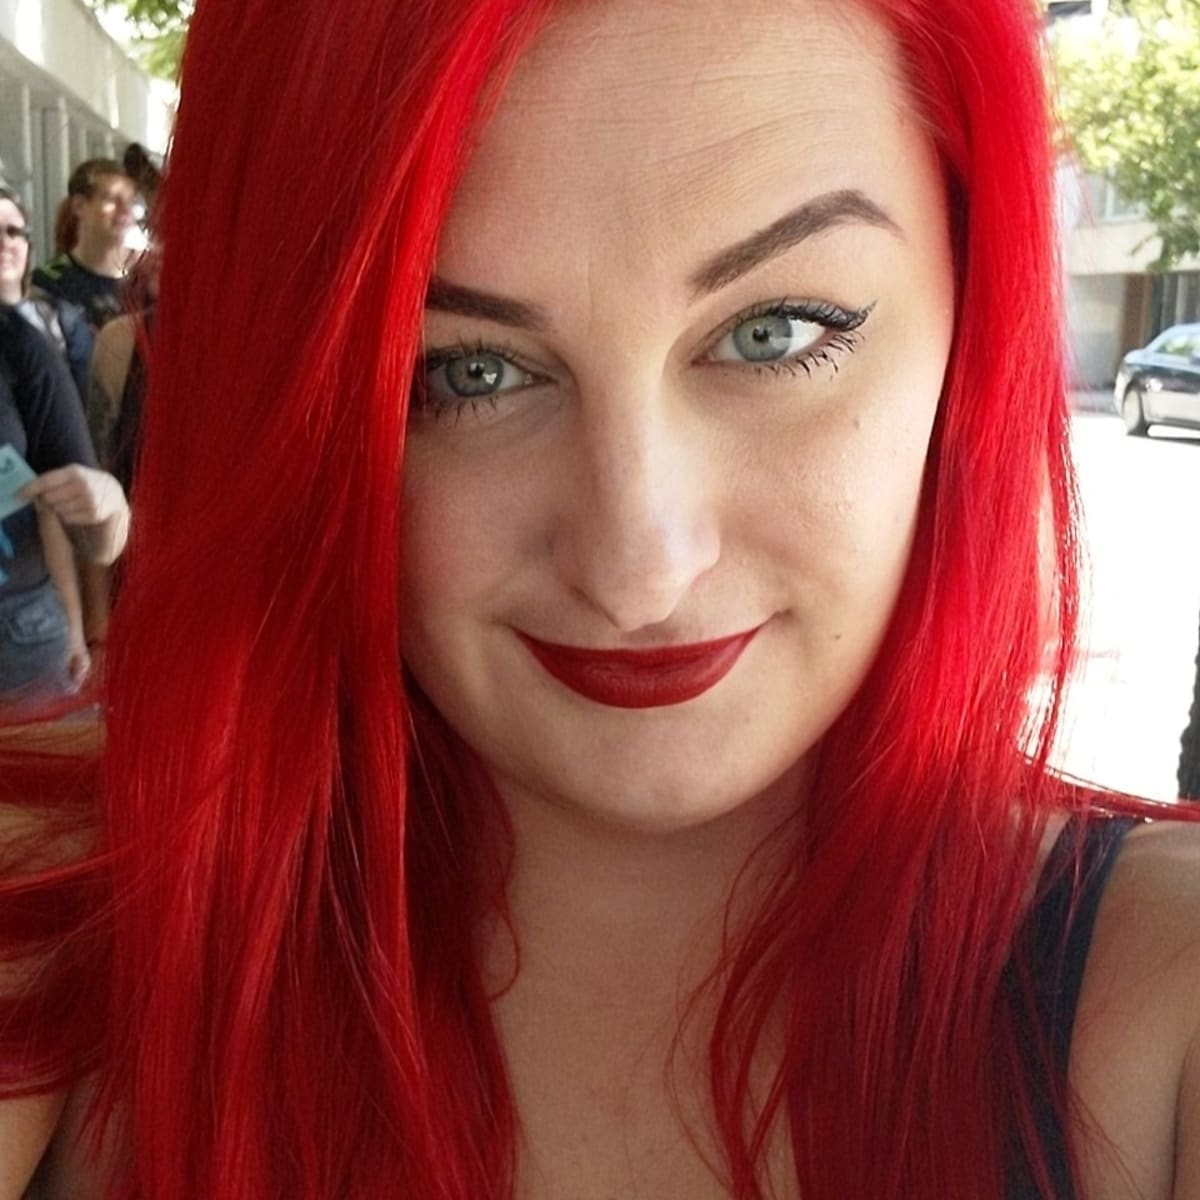 How To Dye Your Hair Ariel Red A Review Of Arctic Fox Semi Permanent Hair Dye In Poison Hubpages